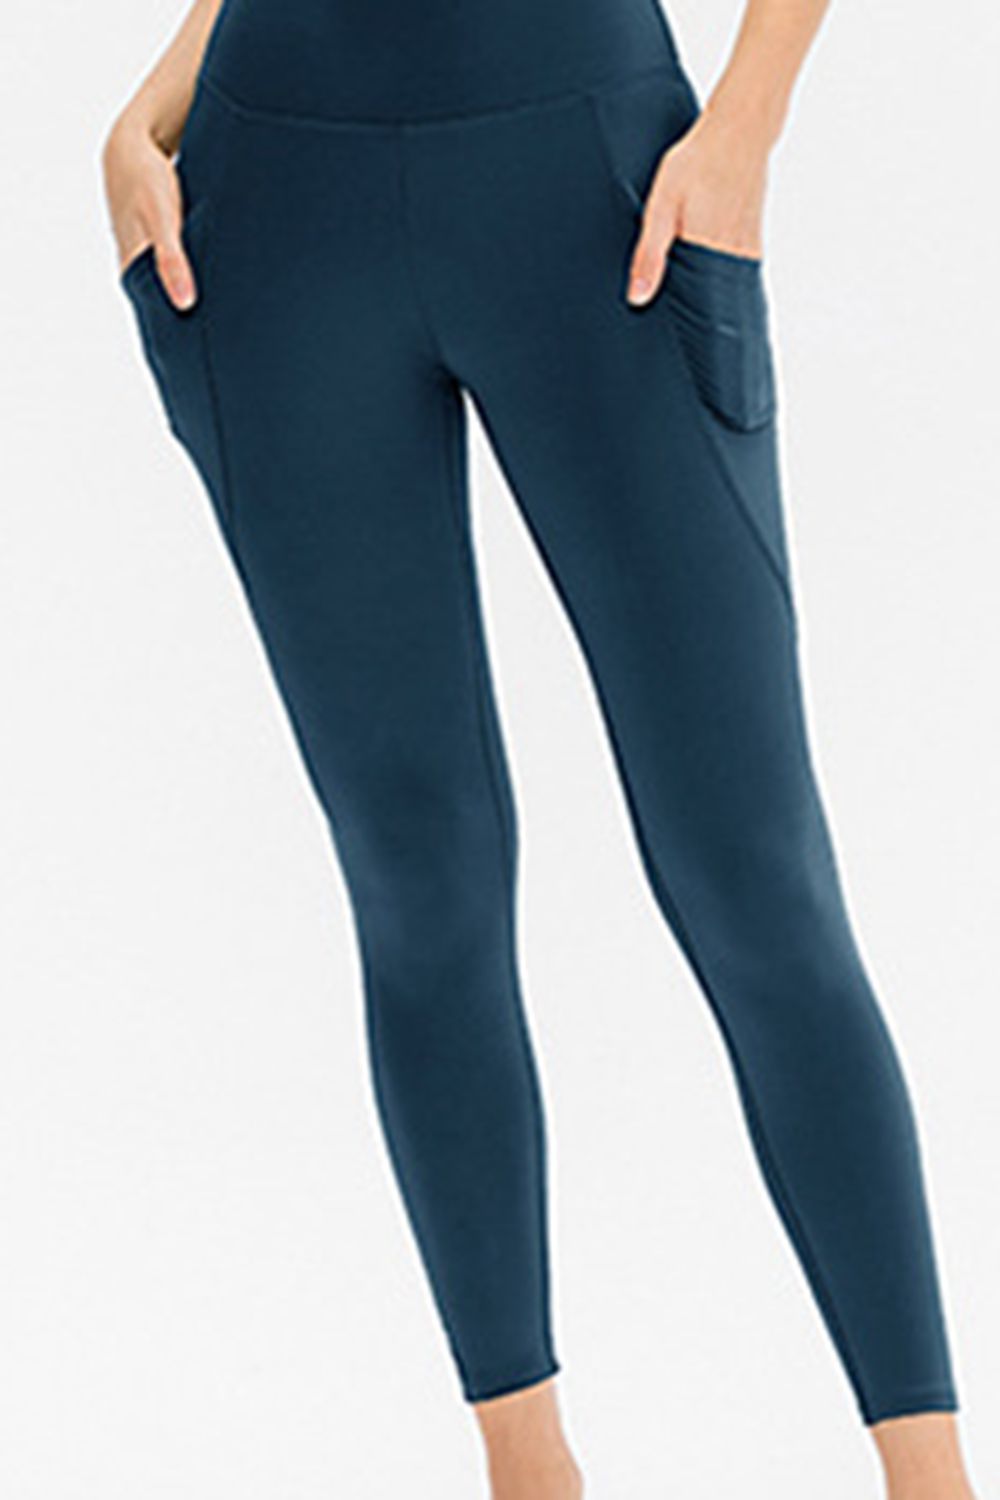 Slim Fit Long Active Leggings with Pockets